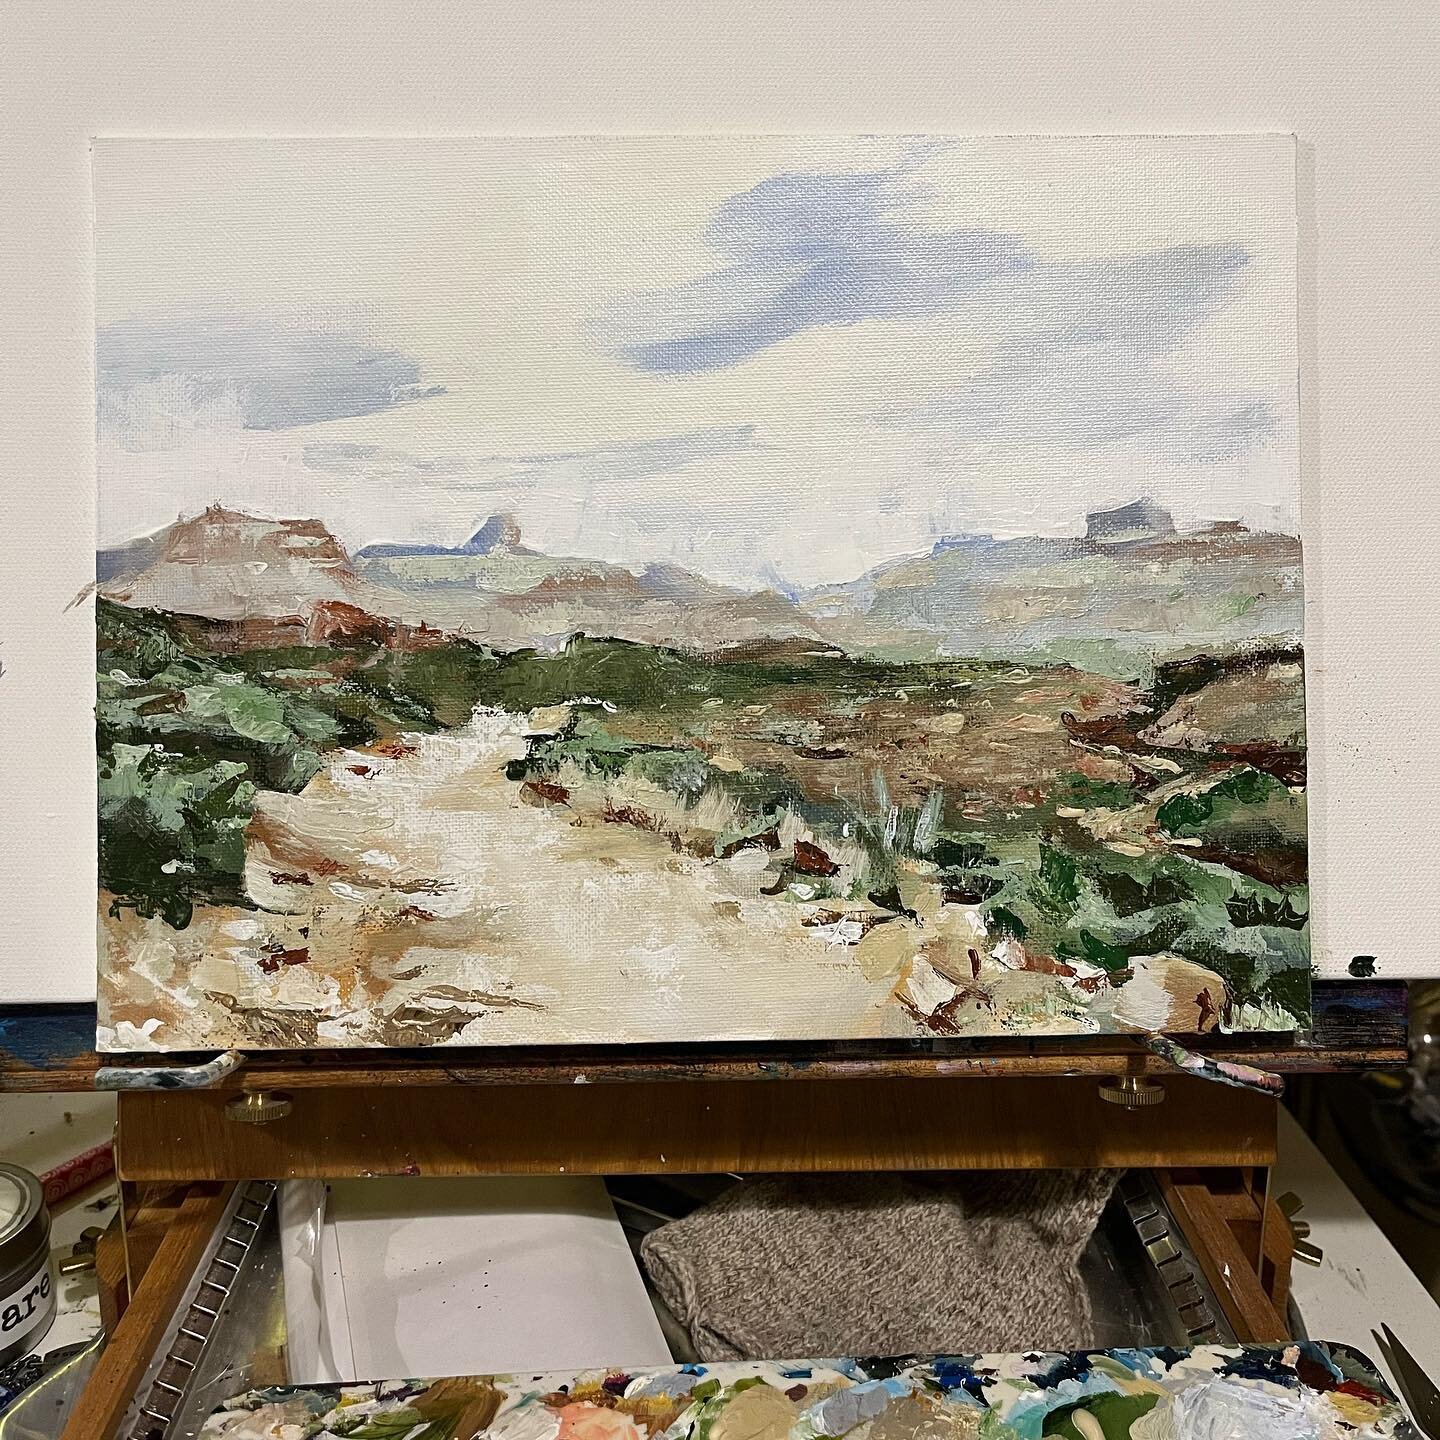 Another in progress! Having fun practicing, this one is of the interior of the Grand Canyon. #paletteknife #landscapepainting #landscape #grandcanyon #grandcanyonnationalpark #painting #acryliconcanvas #practice #baltimoreartist